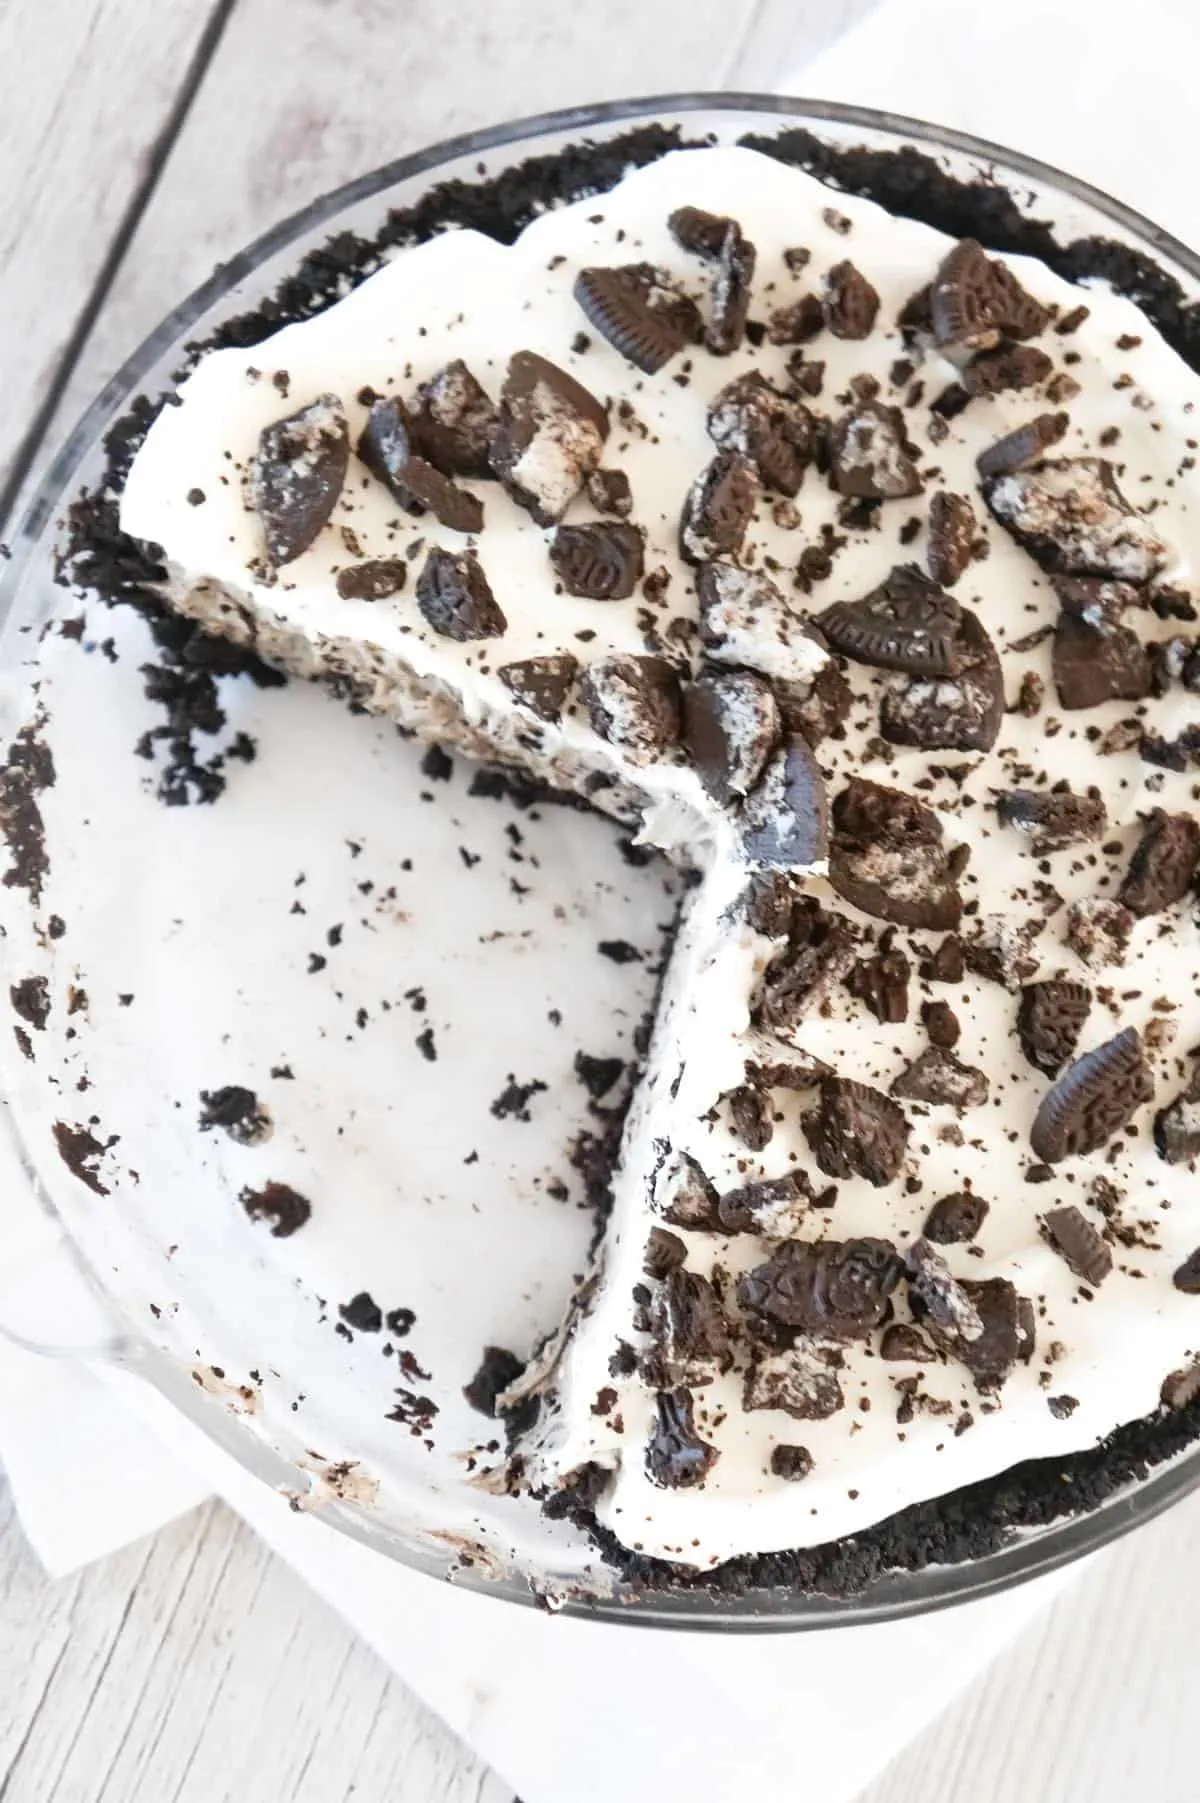 Oreo Pie is a tasty no bake dessert recipe that starts out with an Oreo crumb pie crust, filled with a creamy pudding and crushed Oreo mixture and topped with Cool Whip.